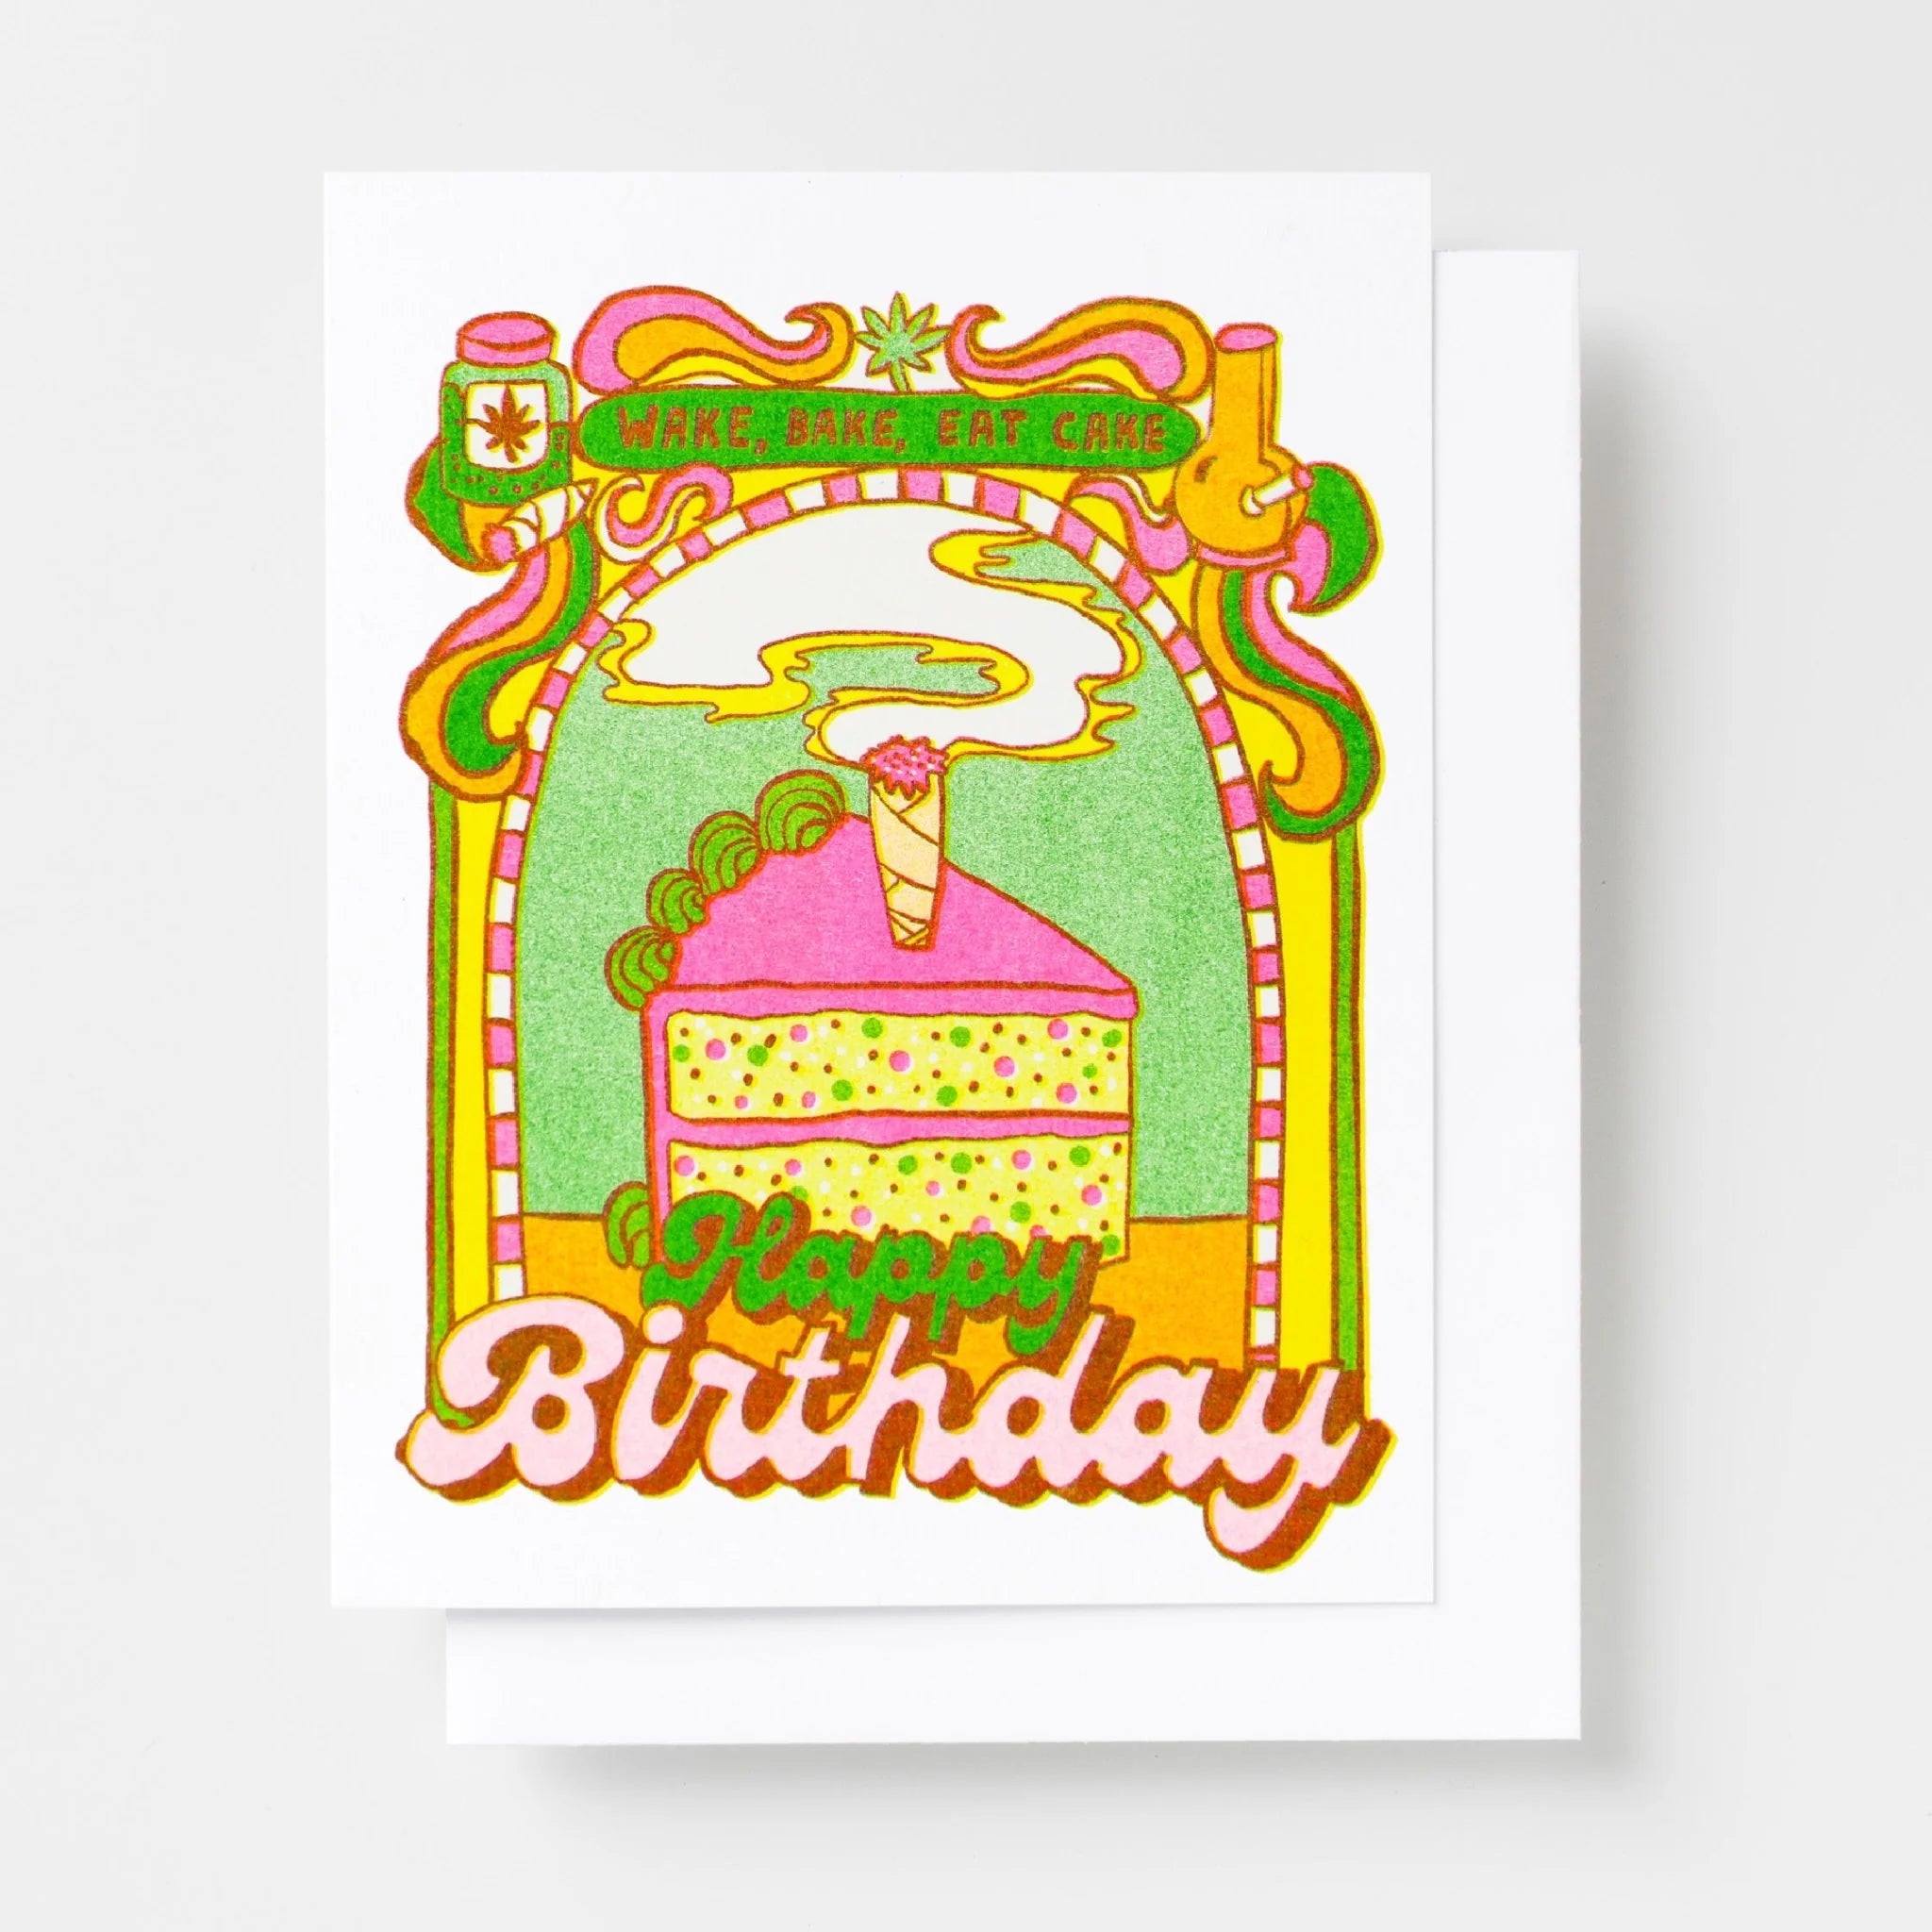 On a white background is a colorful green, yellow and pink card with a cake illustration in the center with a pre-roll in the center and text that reads, "Wake, Bake, Eat Cake Happy Birthday".